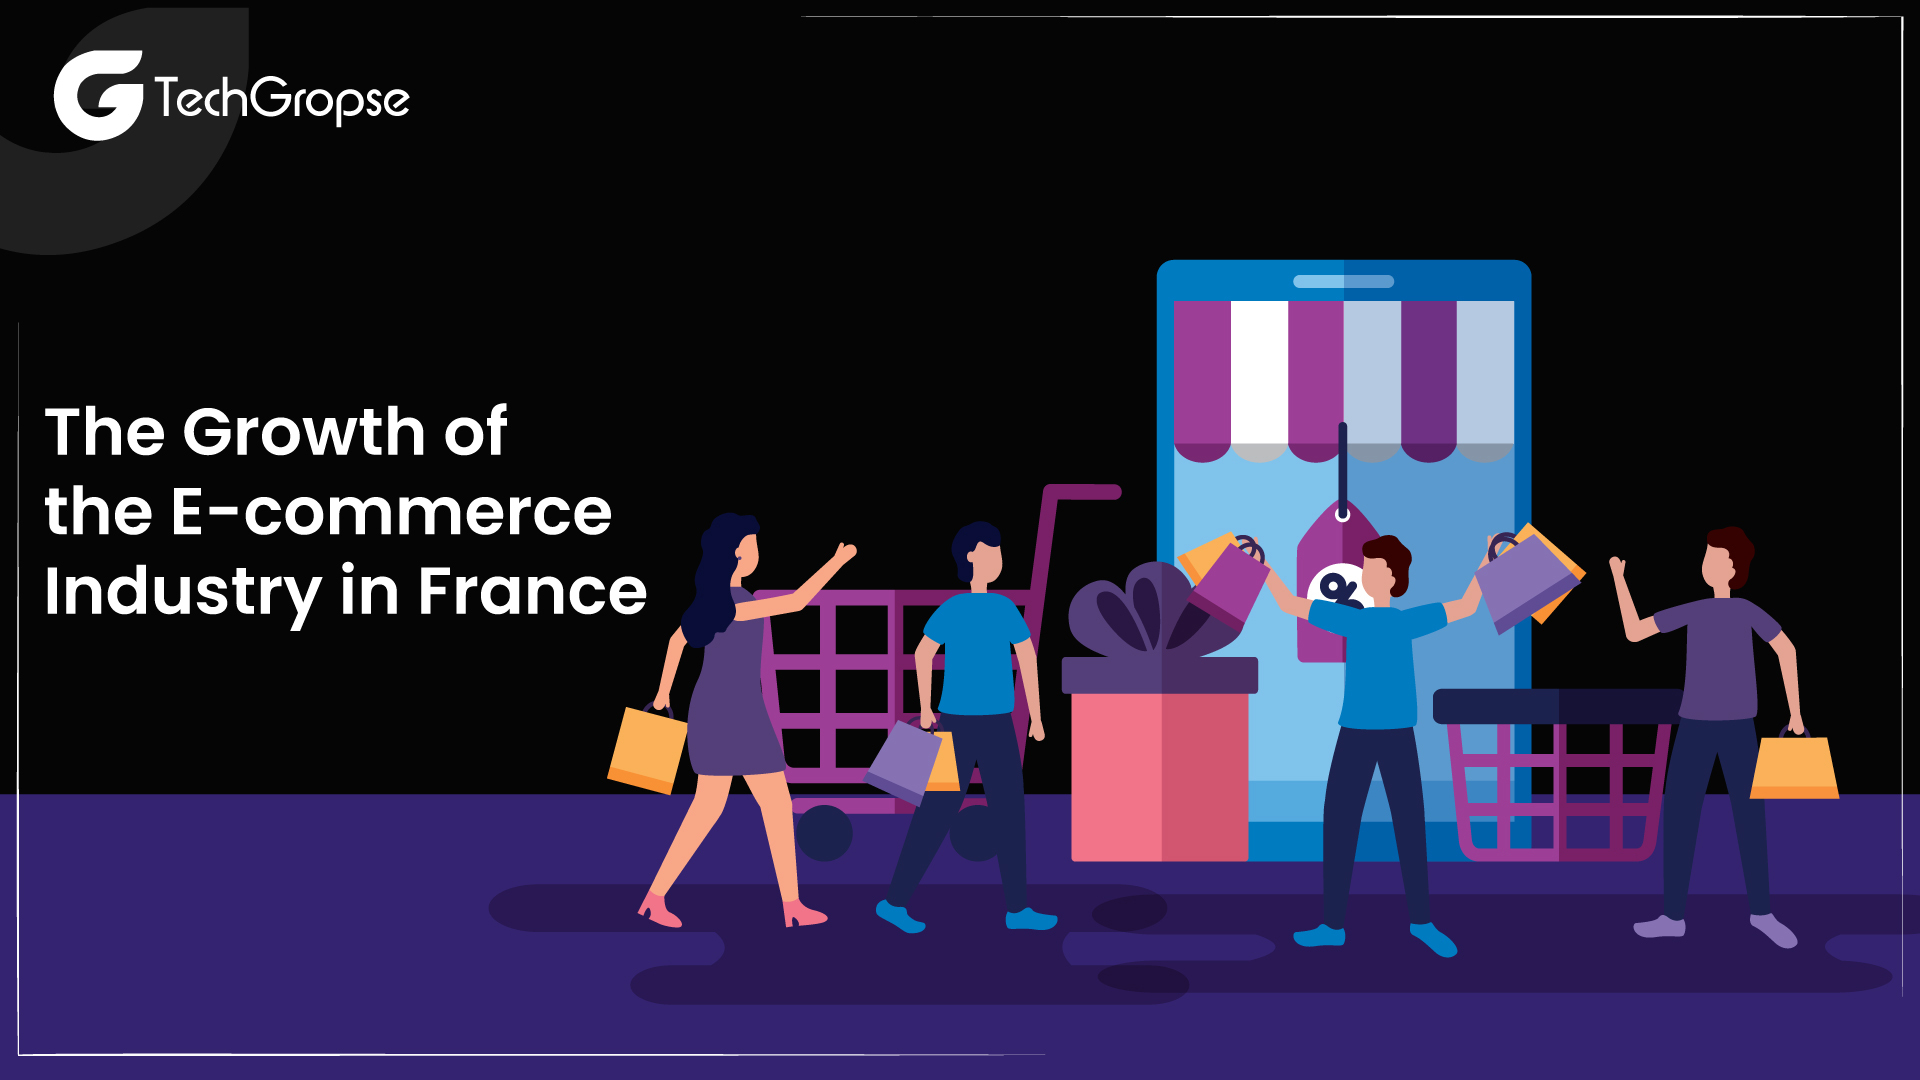 The Growth of the E-commerce Industry in France